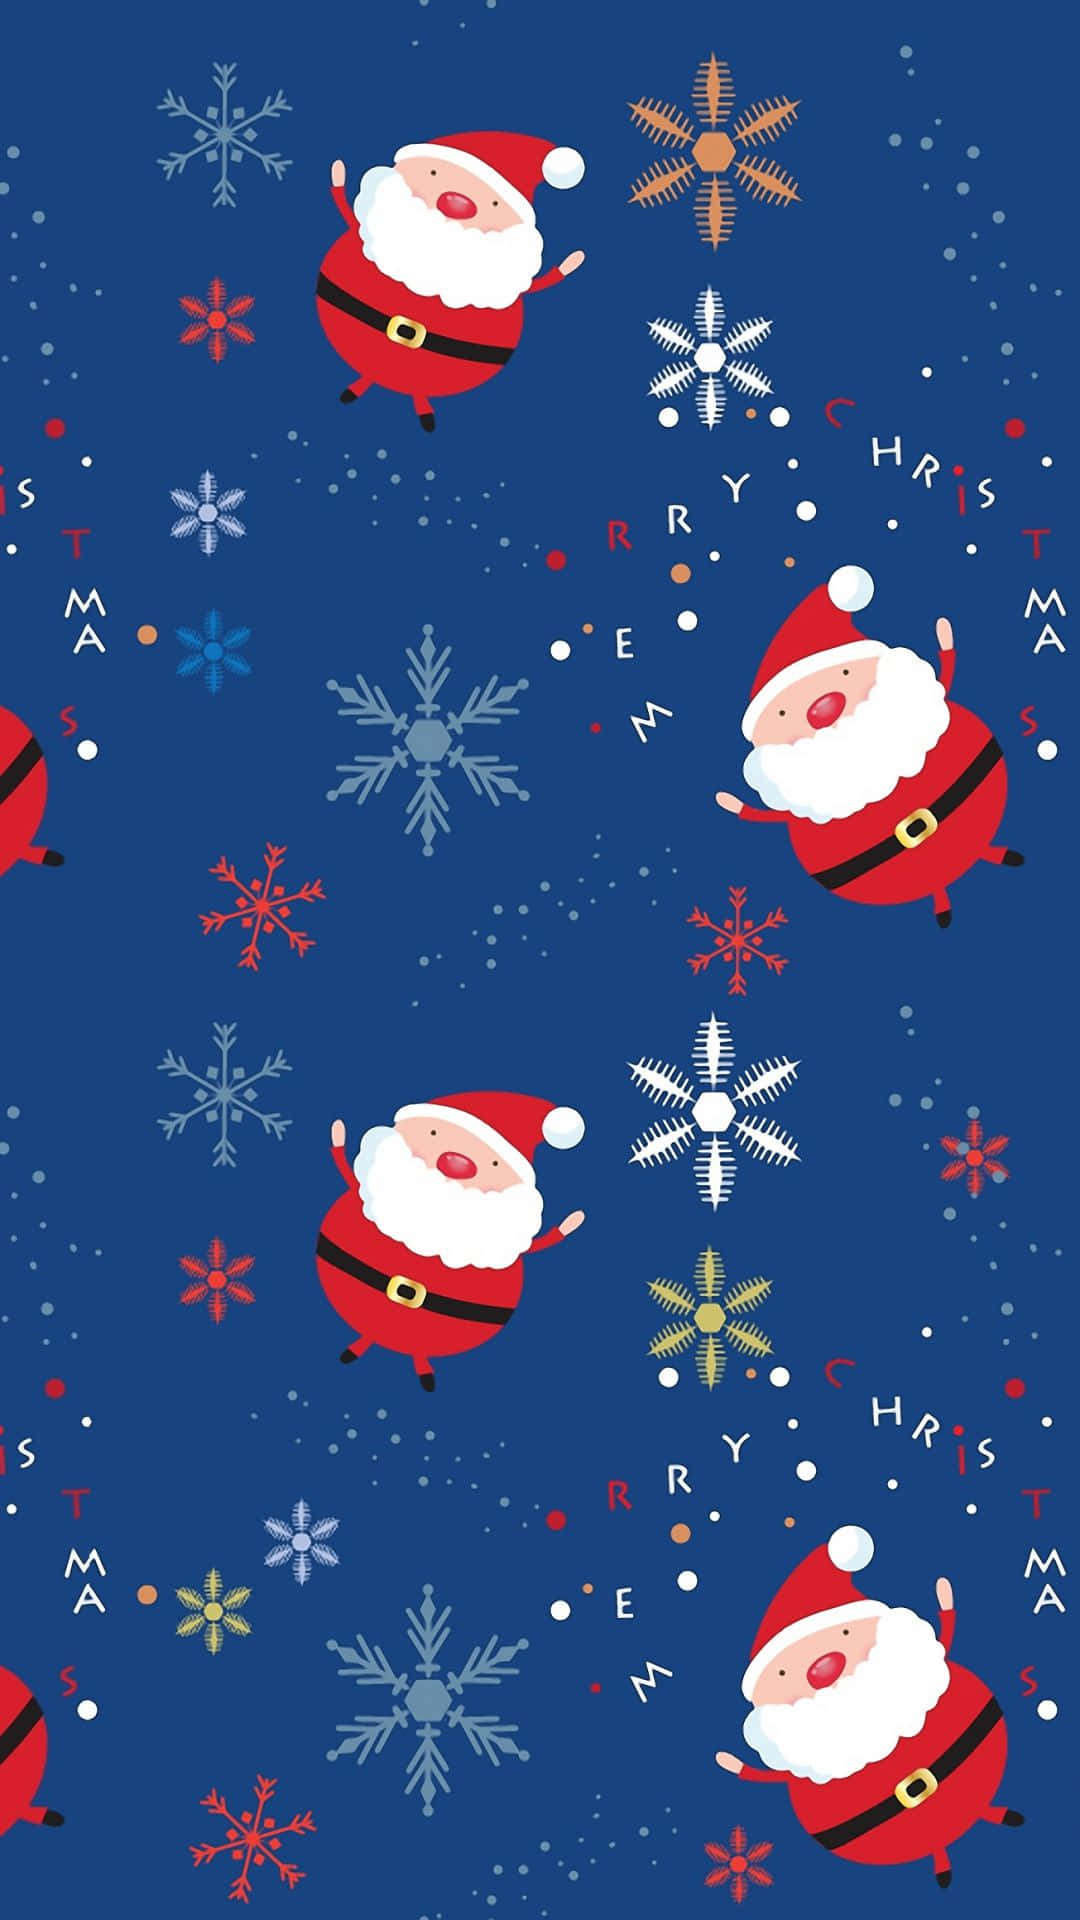 "Let the Christmas festivities begin with Santa Claus!" Wallpaper